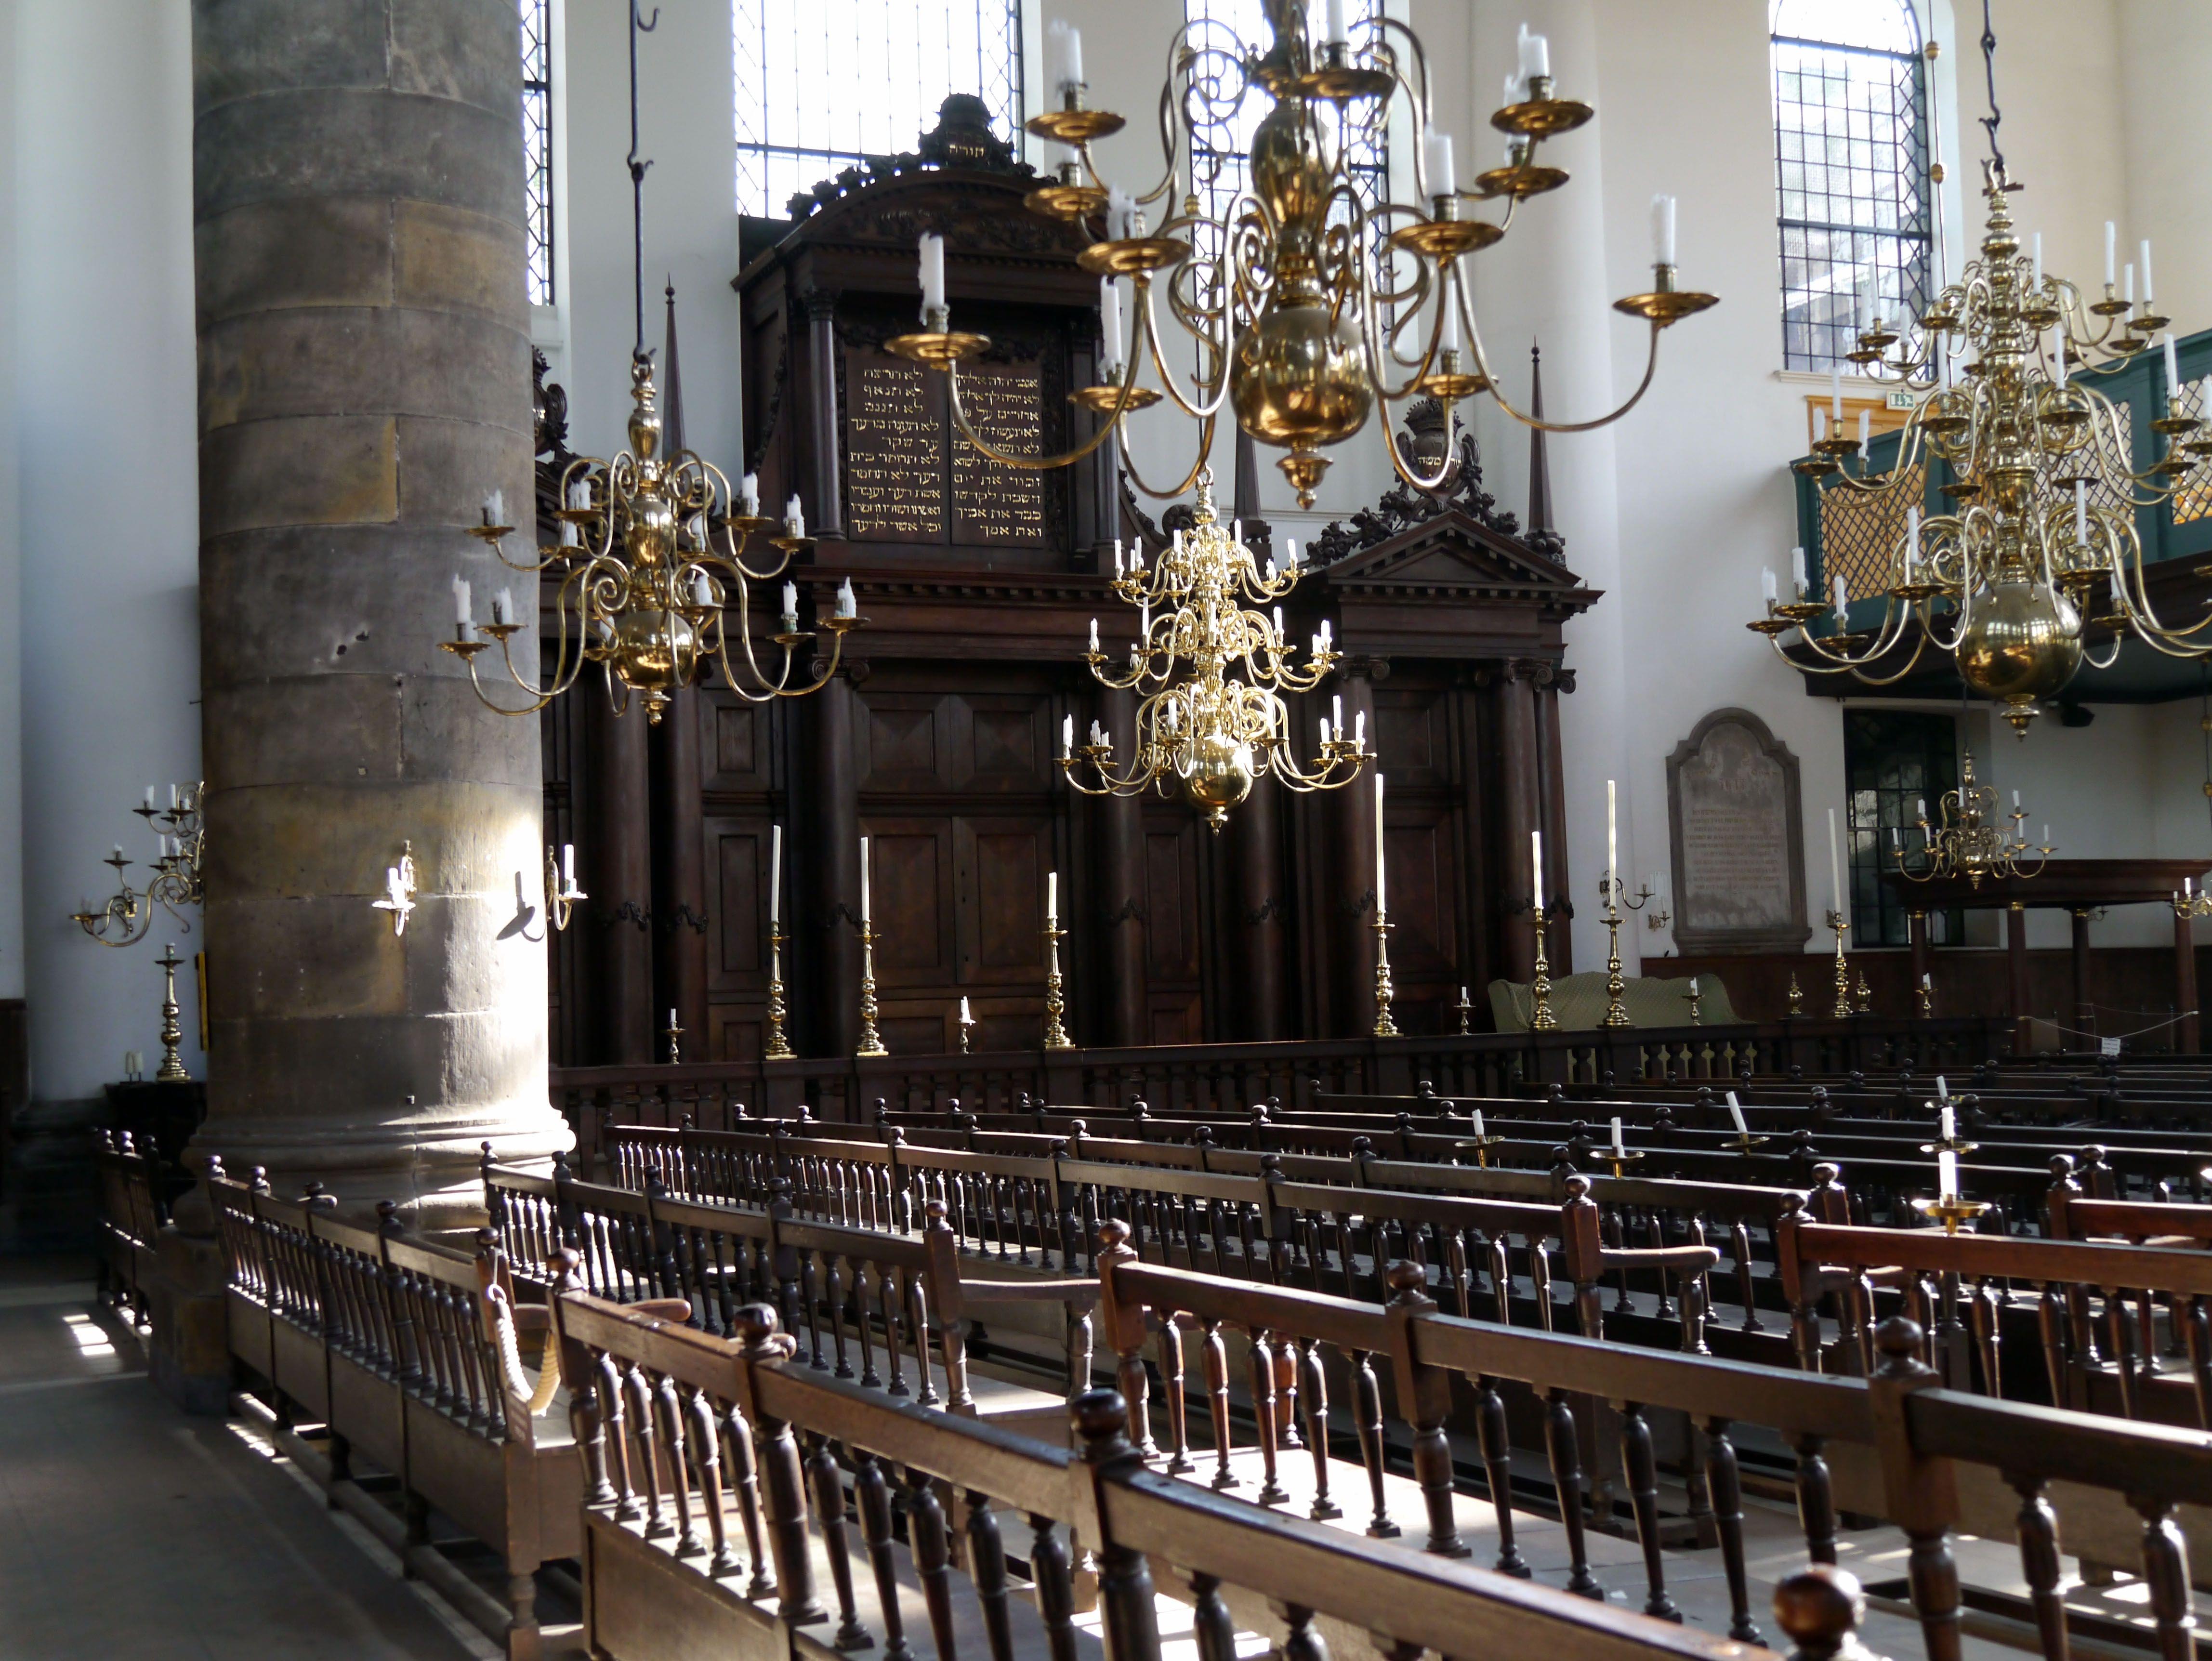 Portuguese Synagogue of Amsterdam